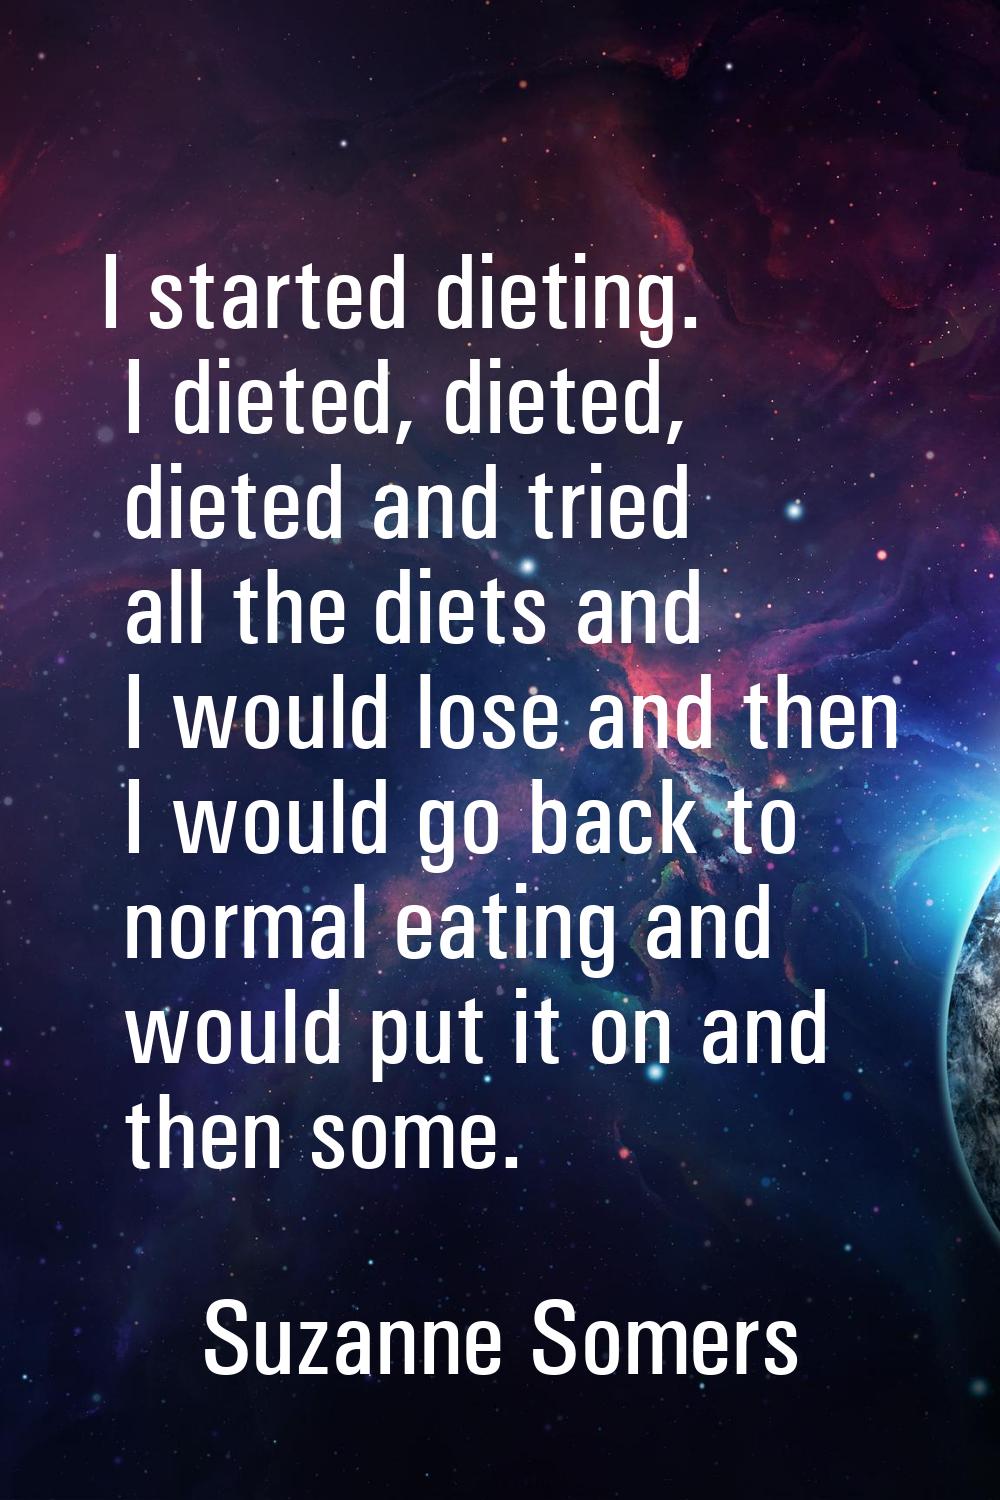 I started dieting. I dieted, dieted, dieted and tried all the diets and I would lose and then I wou